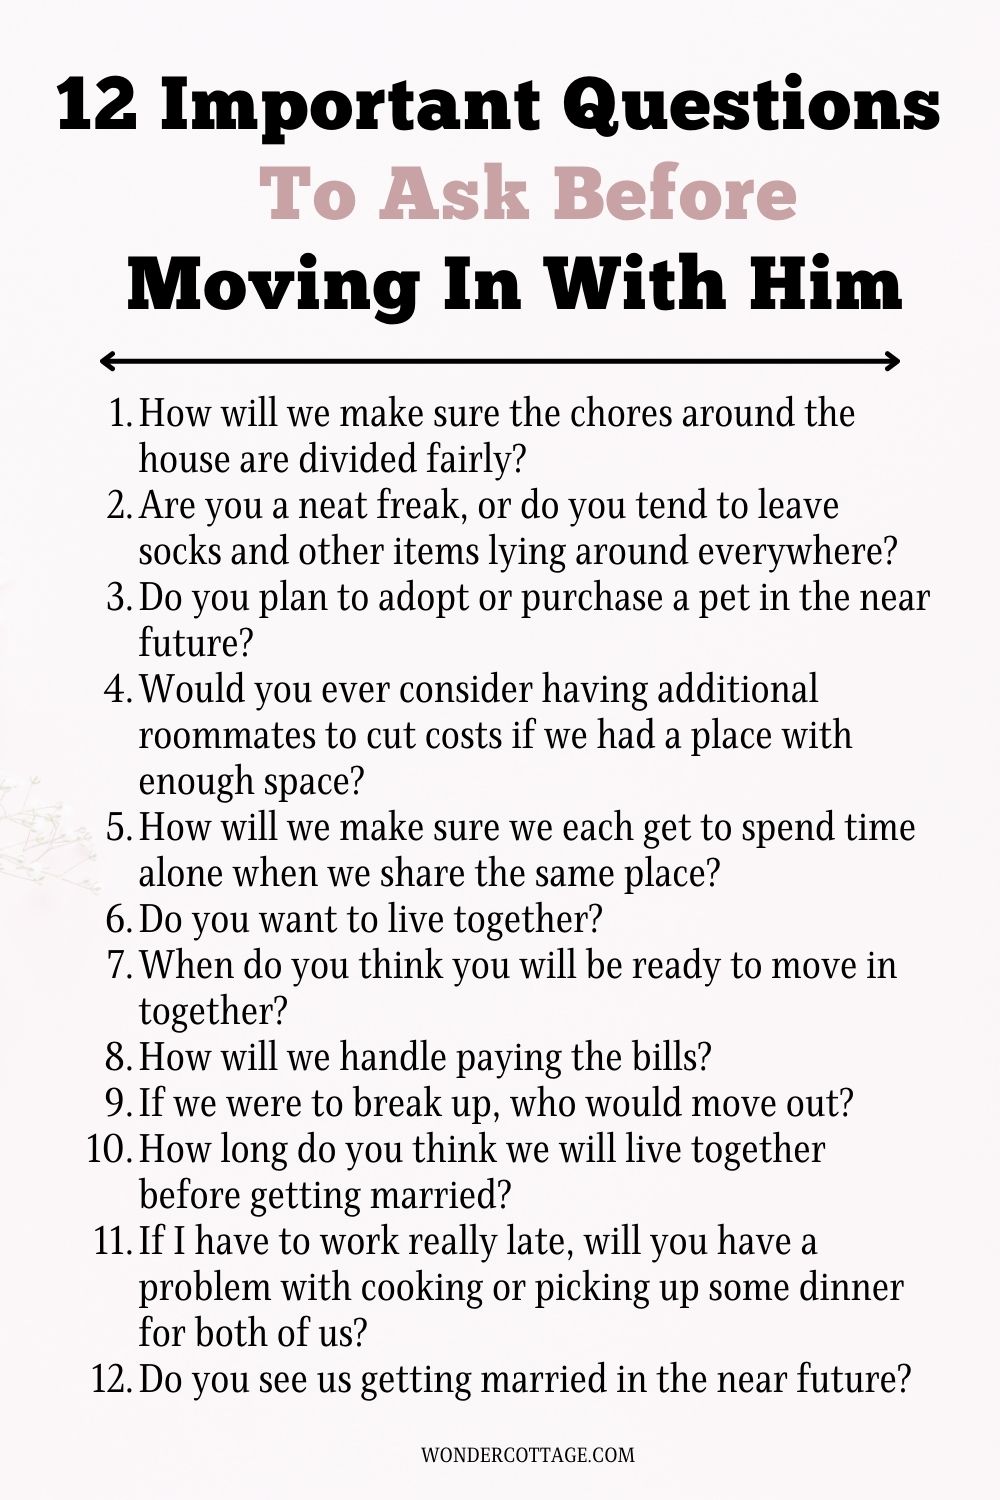 Important questions to ask before moving in with him